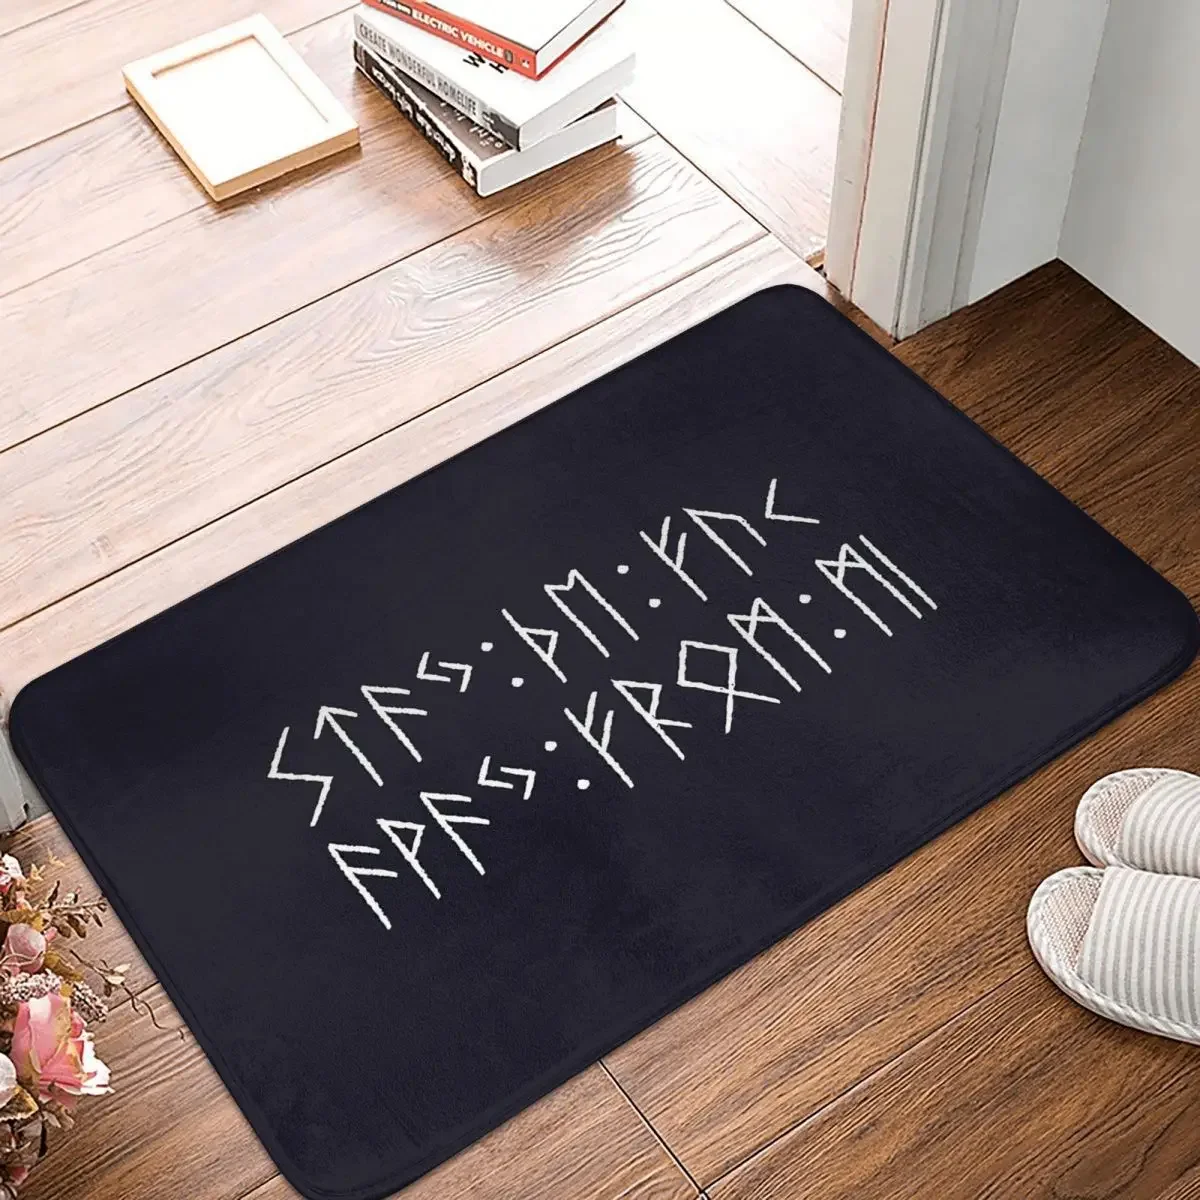 

Viking Valhalla Non-slip Doormat Stay The Fxck Away From Me Carpet Living Room Bedroom Mat Welcome Indoor Pattern